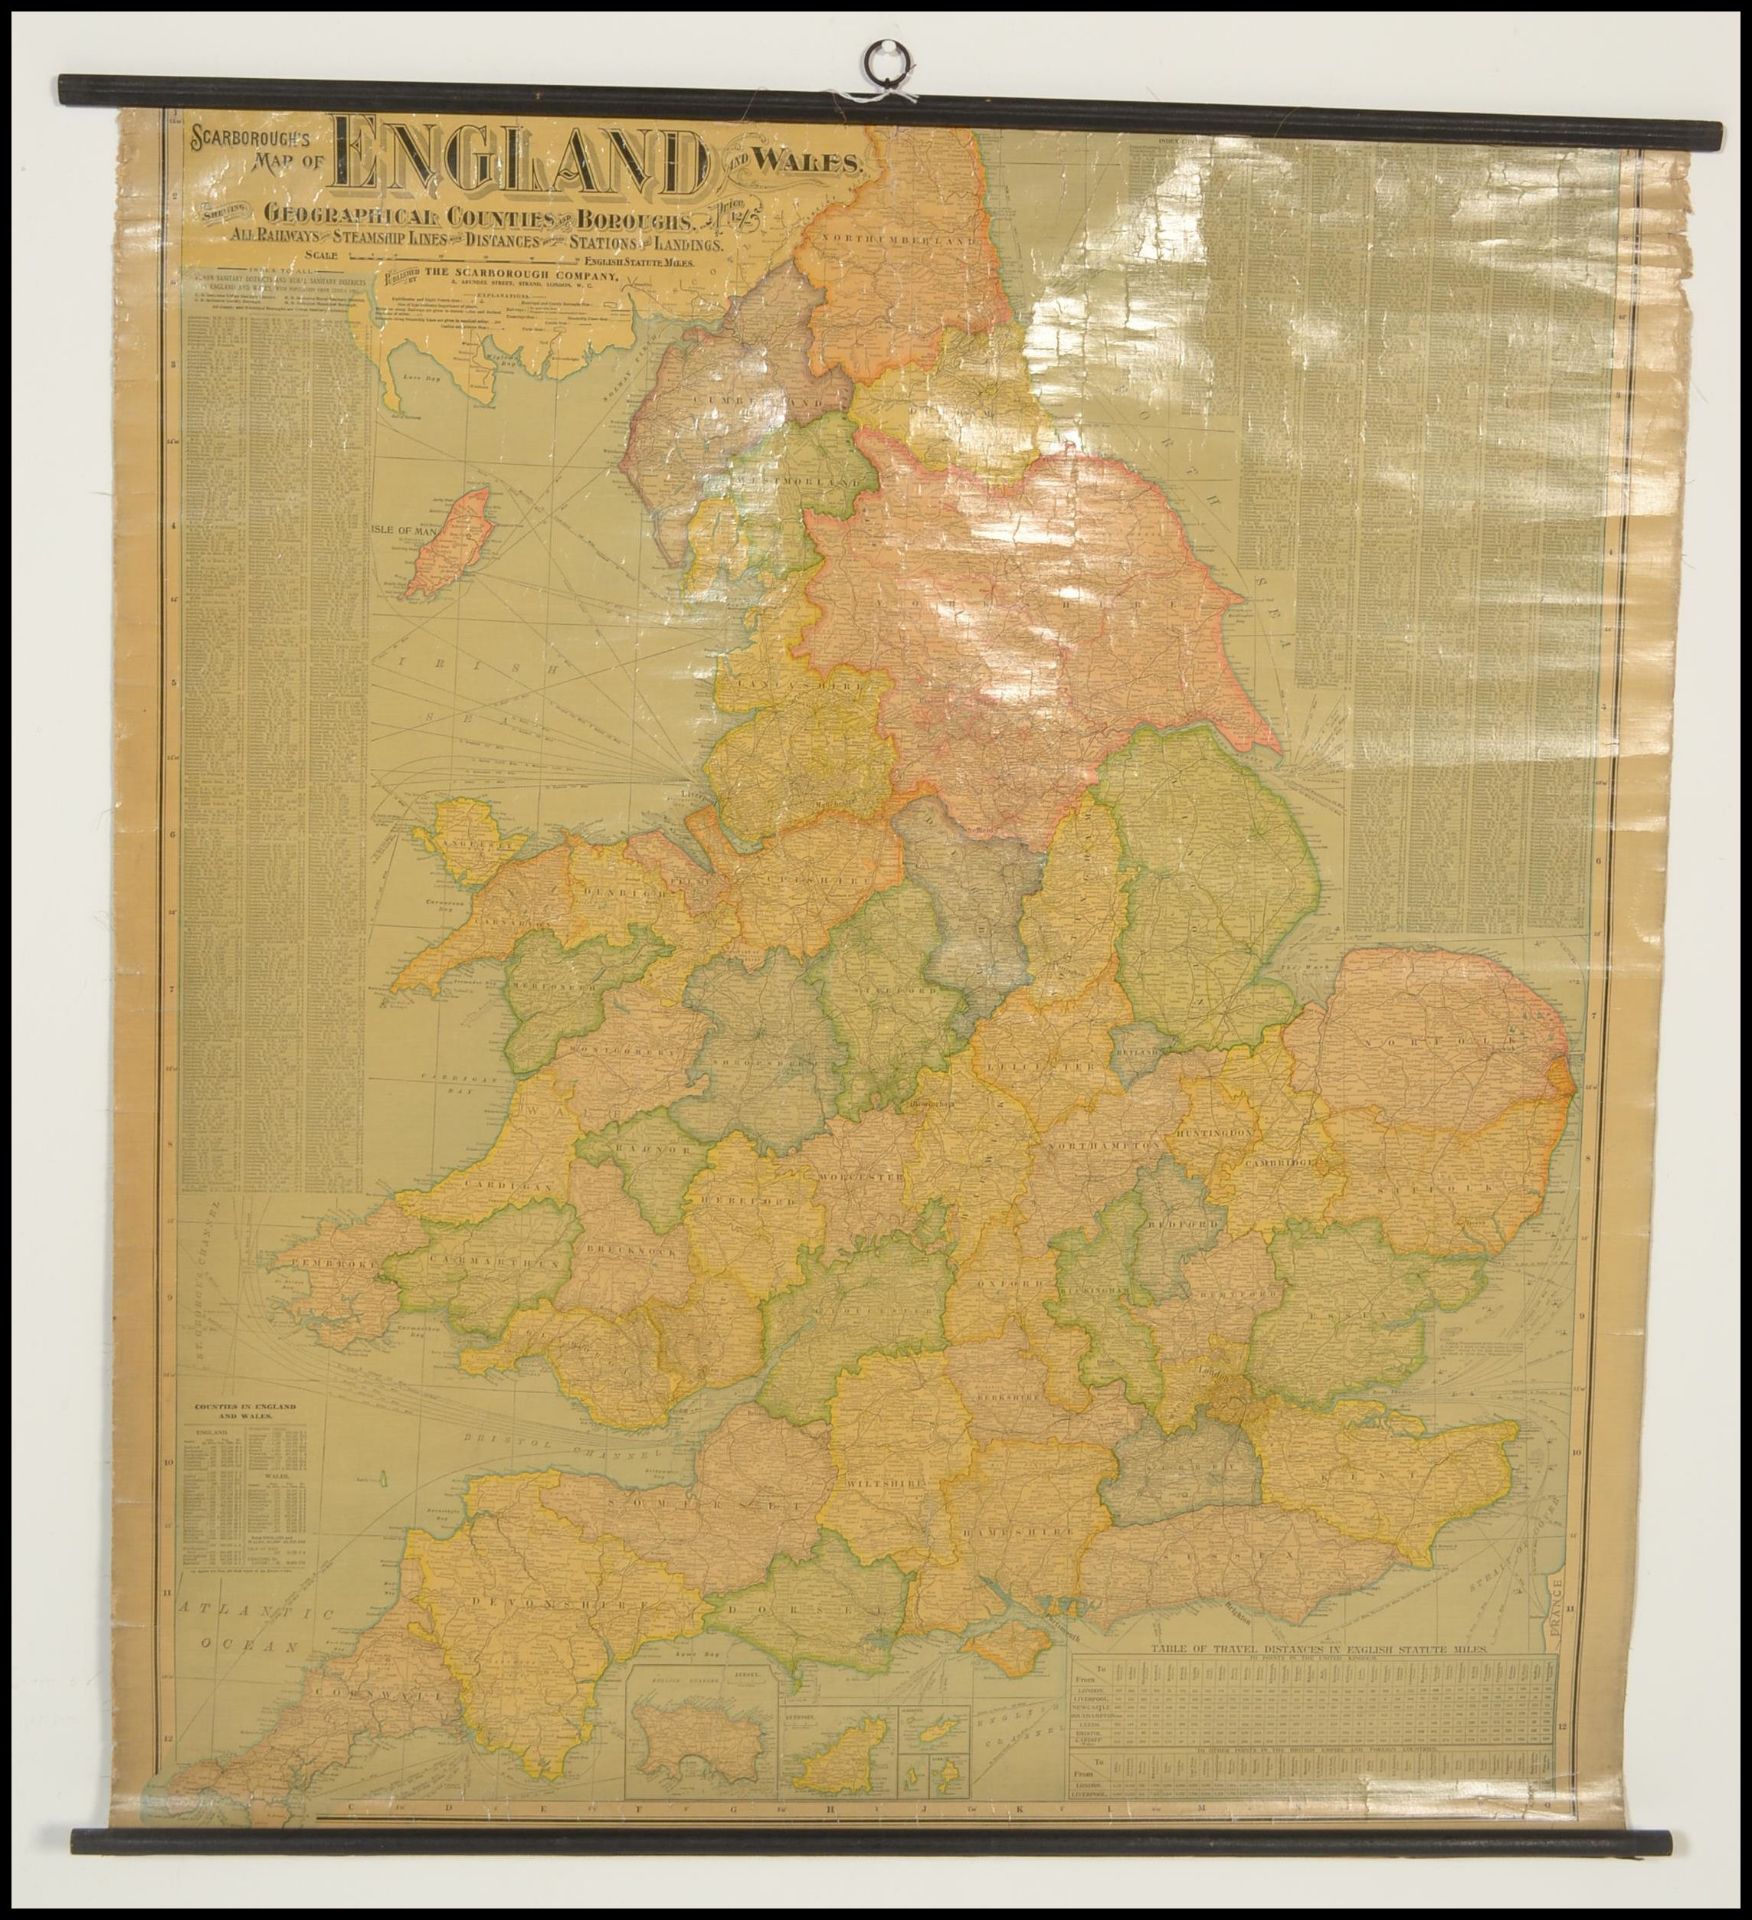 A Vintage Scarborough map of England and wales showing Geographical Counties and Boroughs, all - Bild 2 aus 8